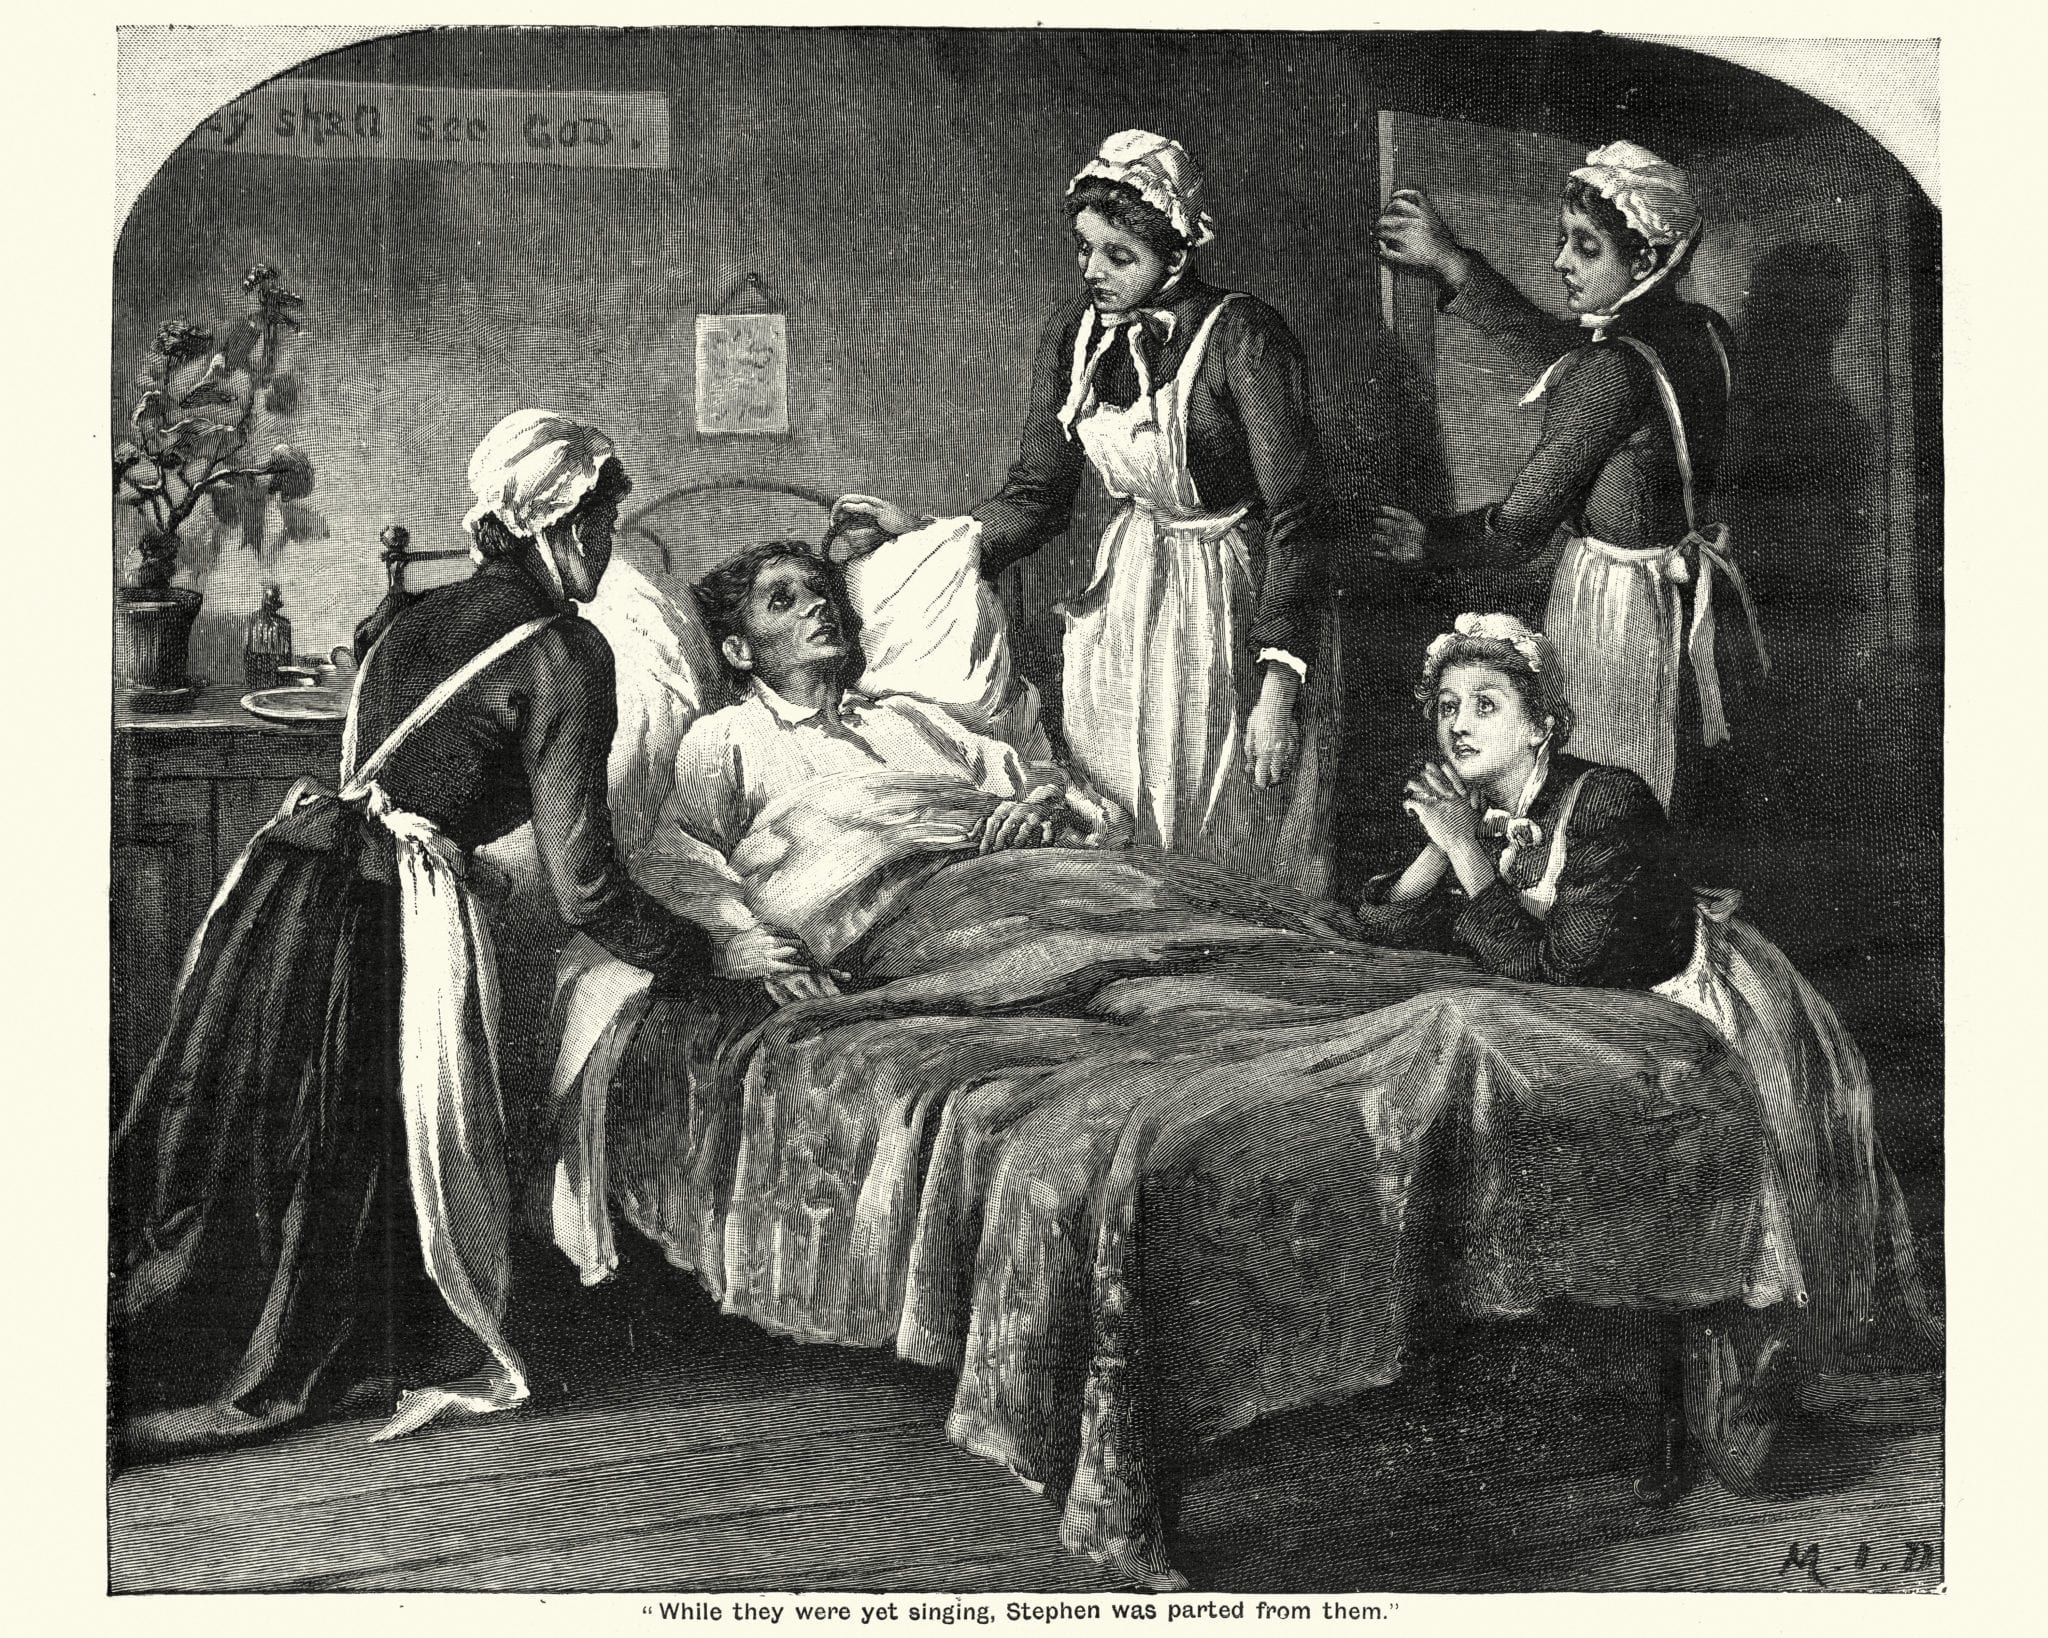 Vintage engraving of Victorian nurses caring for a dying man suffering from Tuberculosis